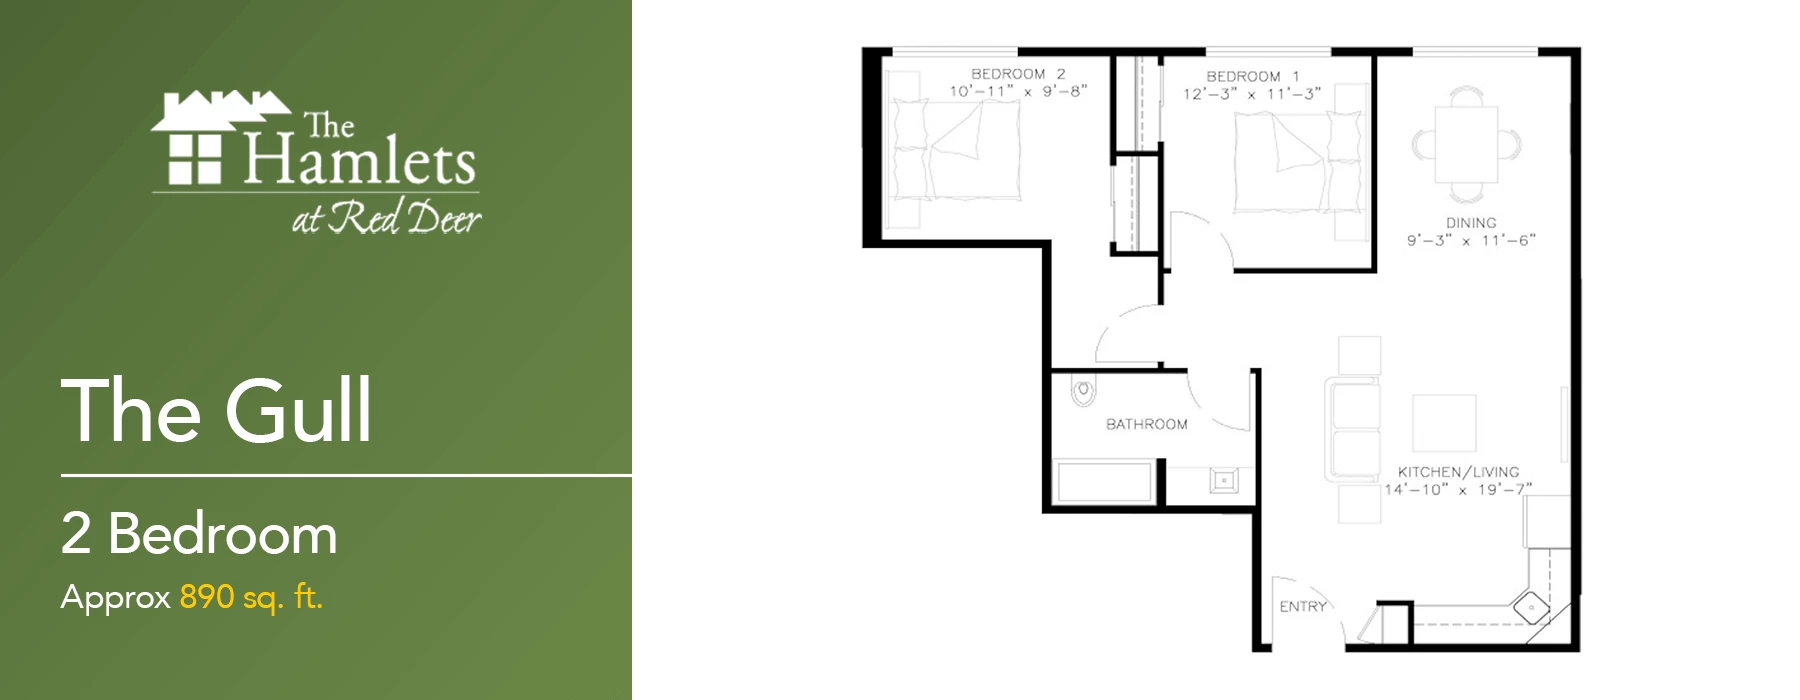 A two bedroom floor plan for The Hamlets at Red Deer